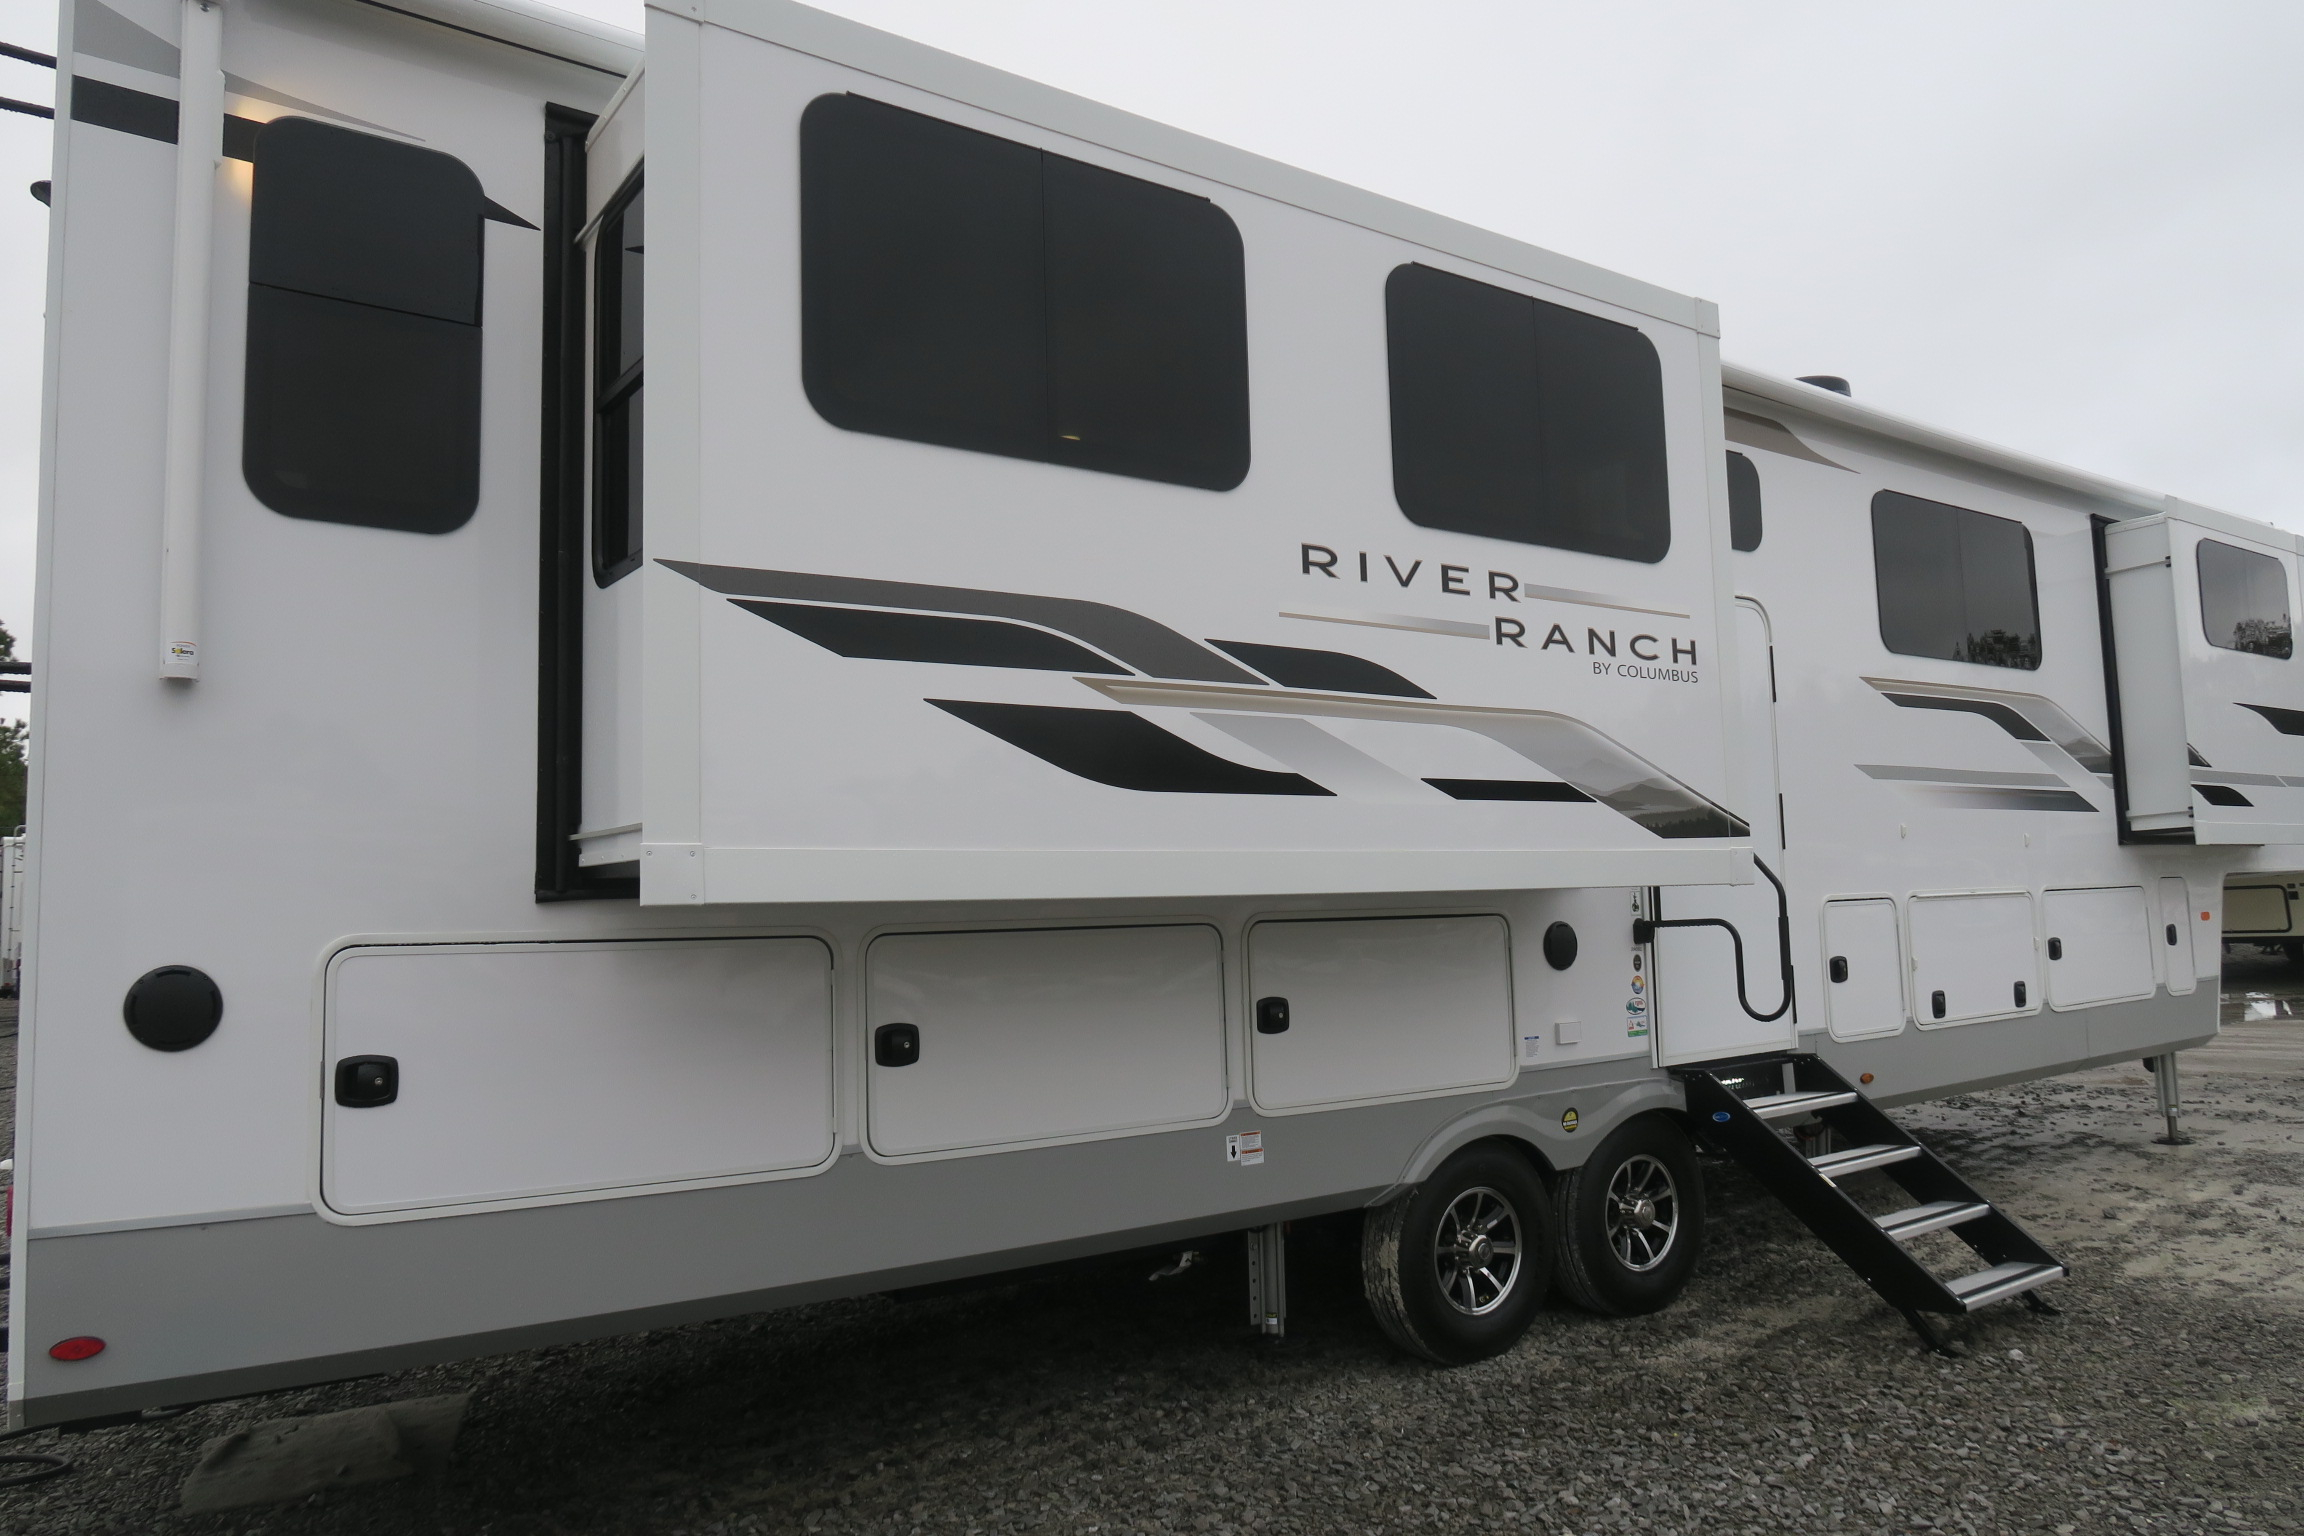 NEW 2021 COLUMBUS RIVER RANCH 390RL Overview Berryland Campers